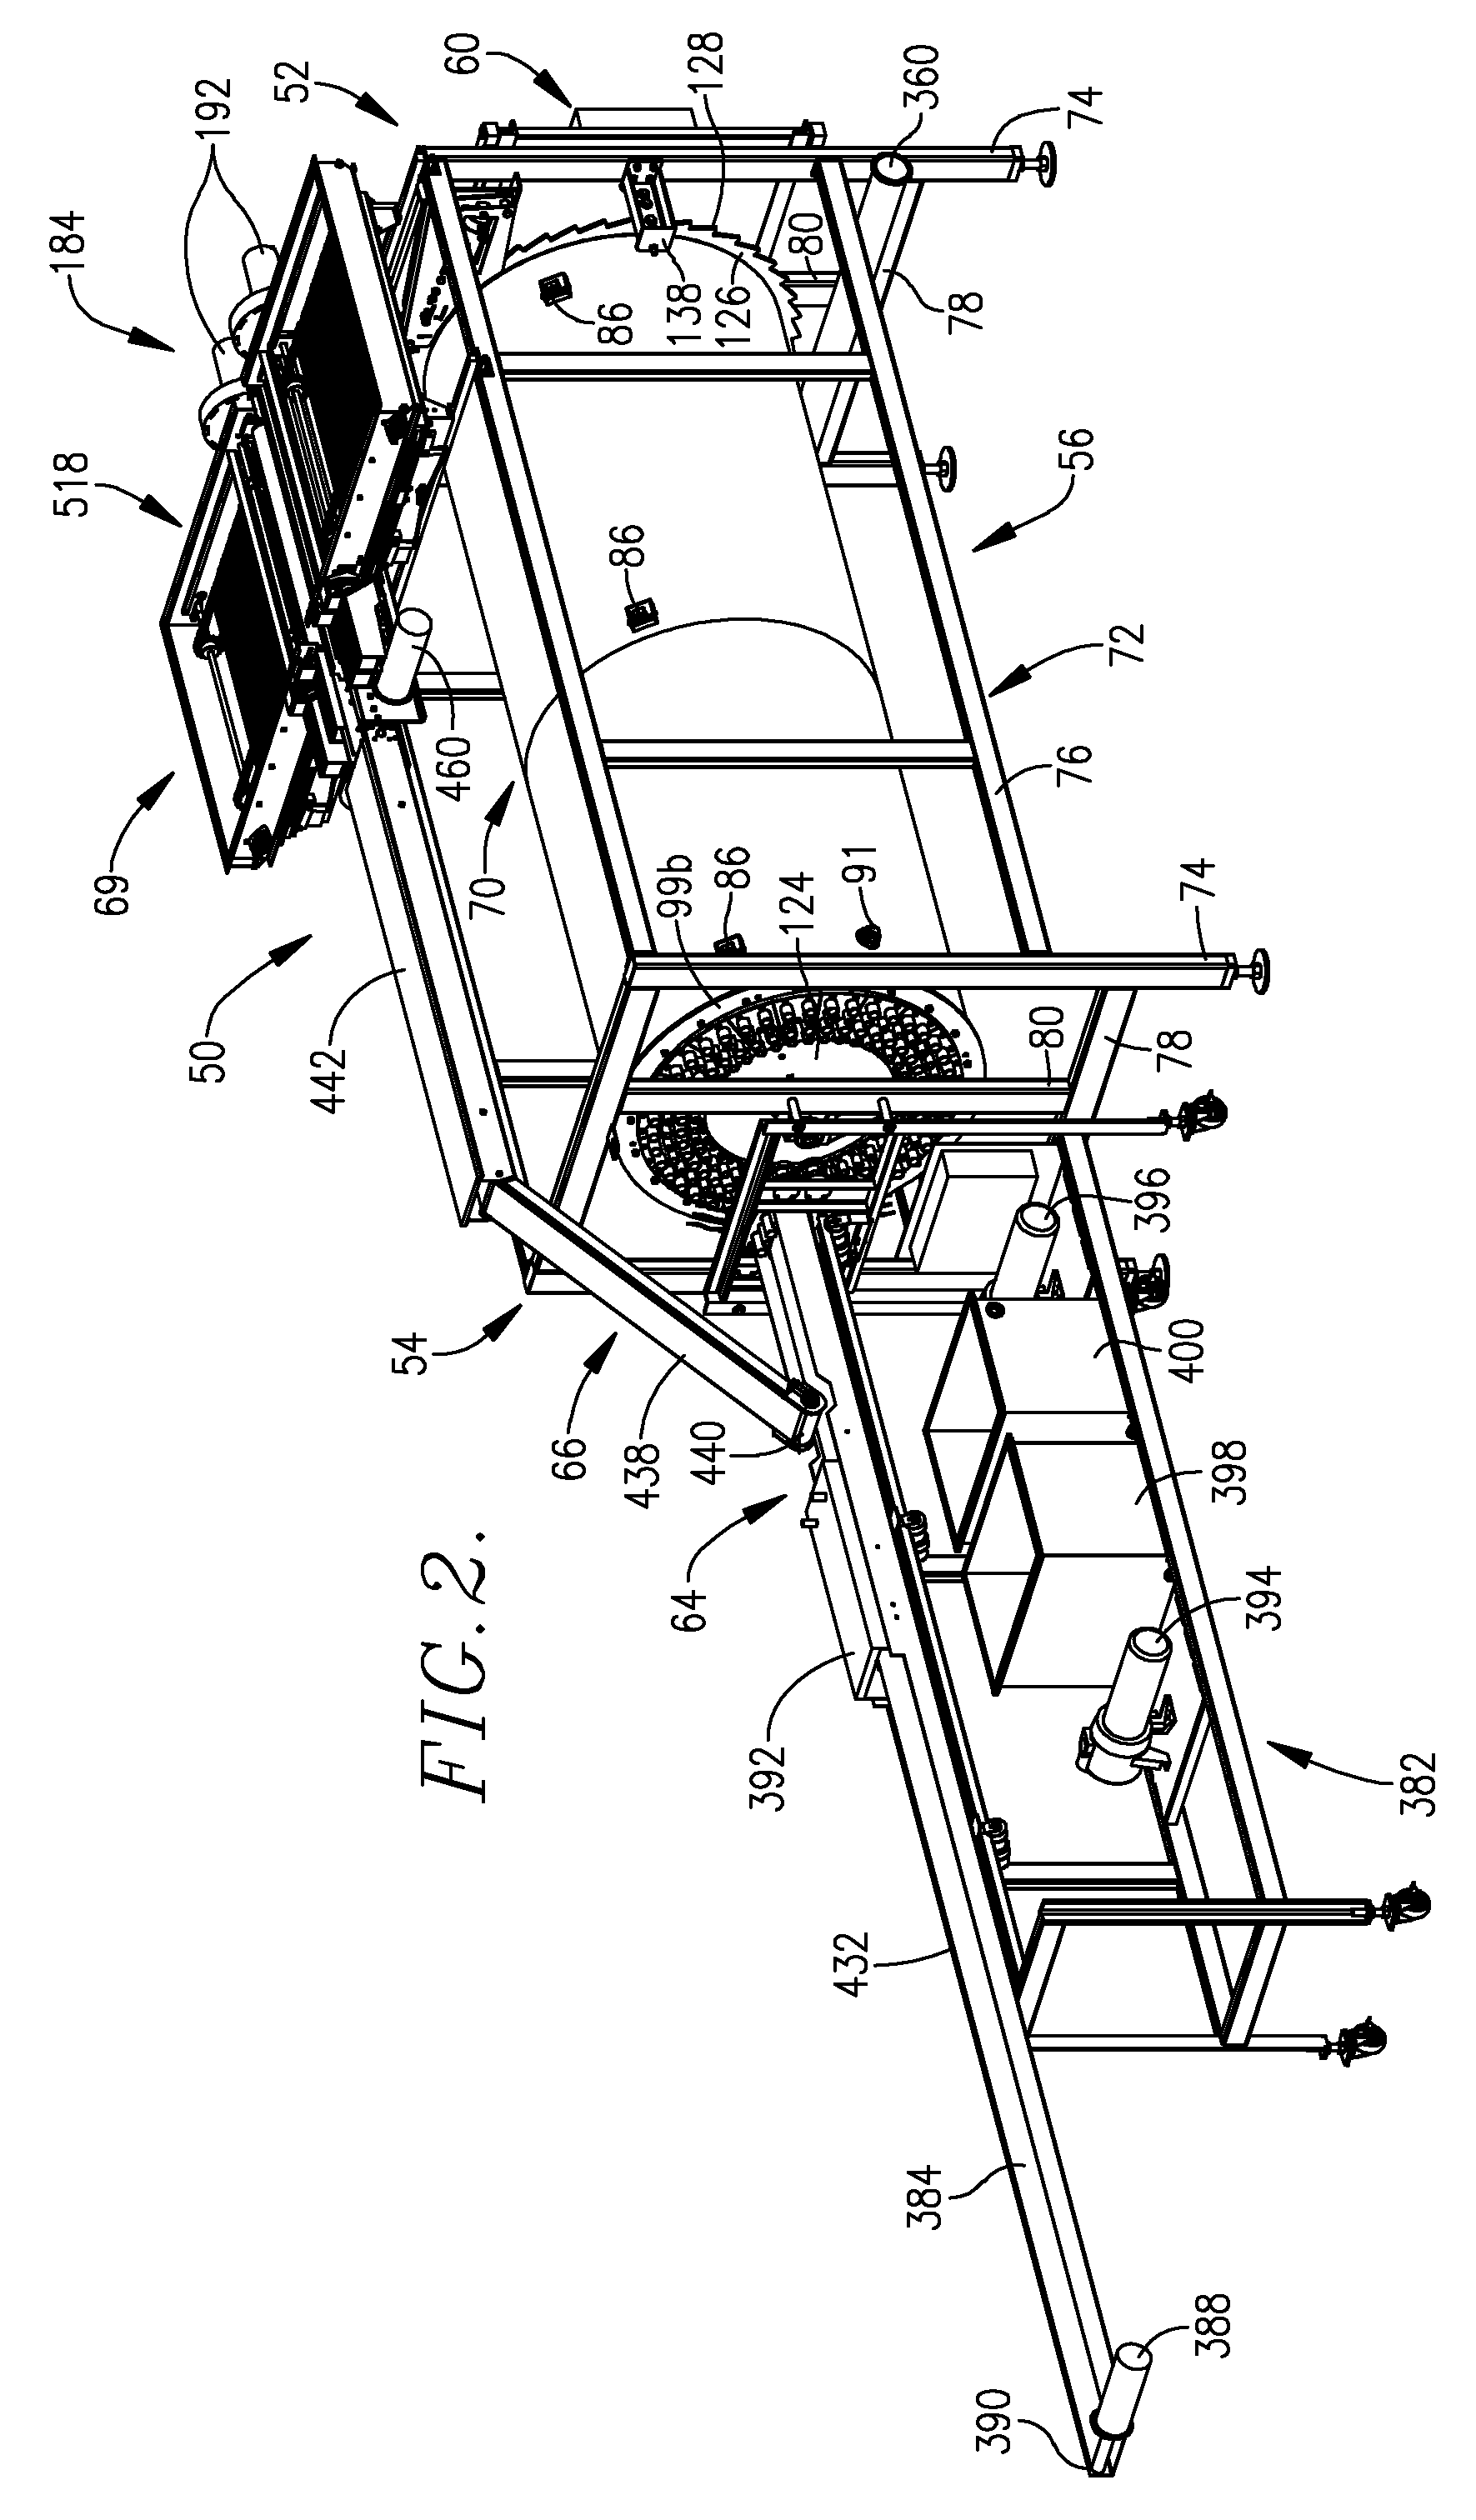 Method and apparatus for production of elongated meat products without casings